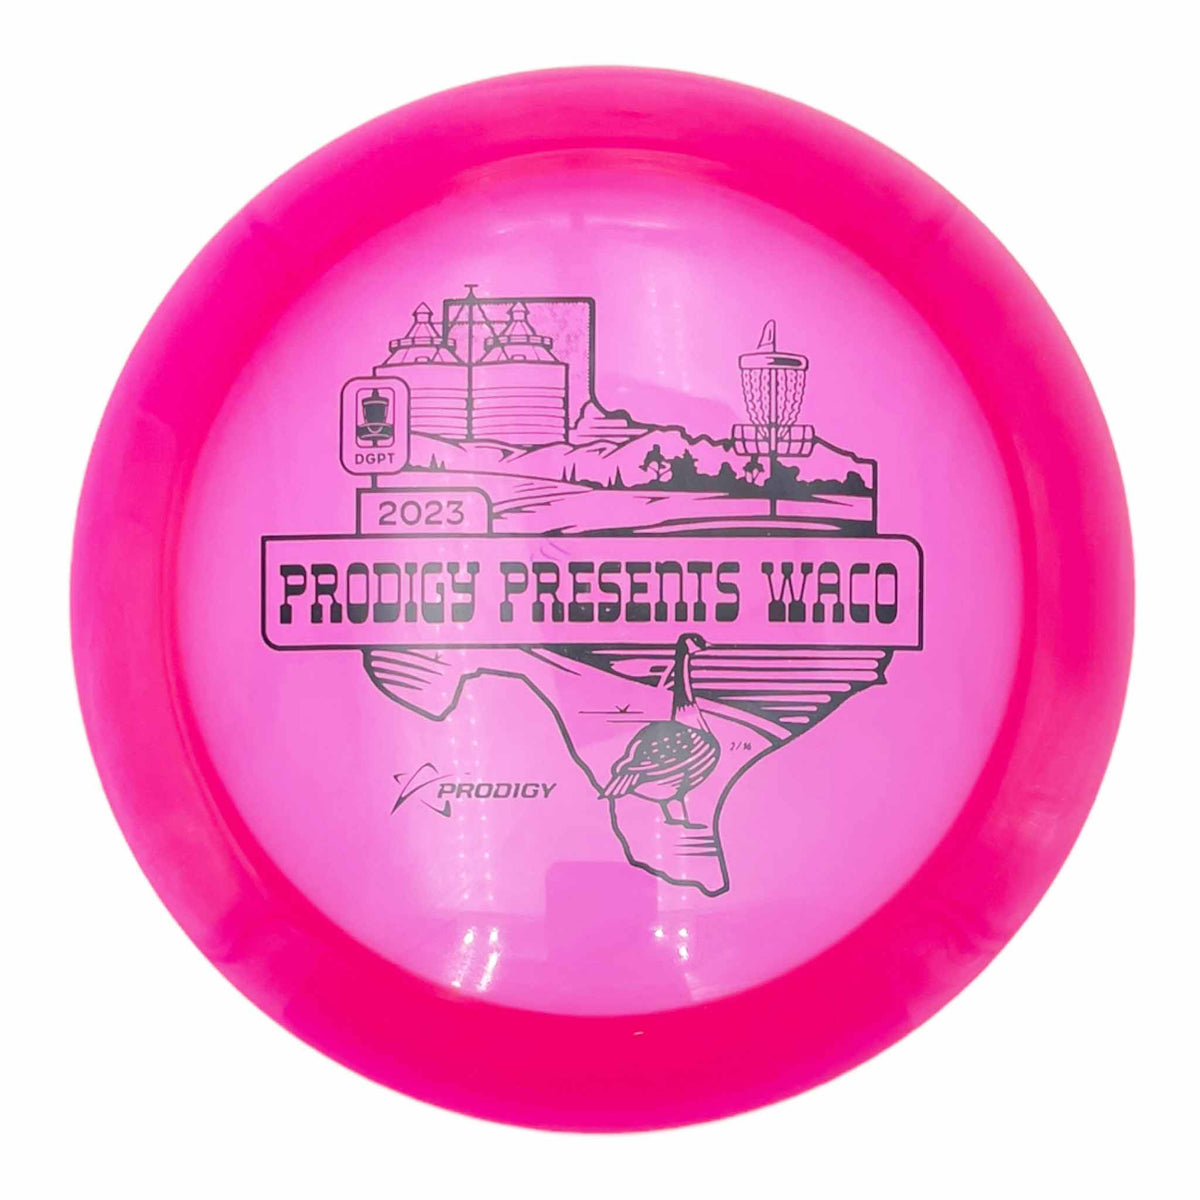 Prodigy WACO Charity Open 400 Airborn Falcor distance driver - Pink / Black